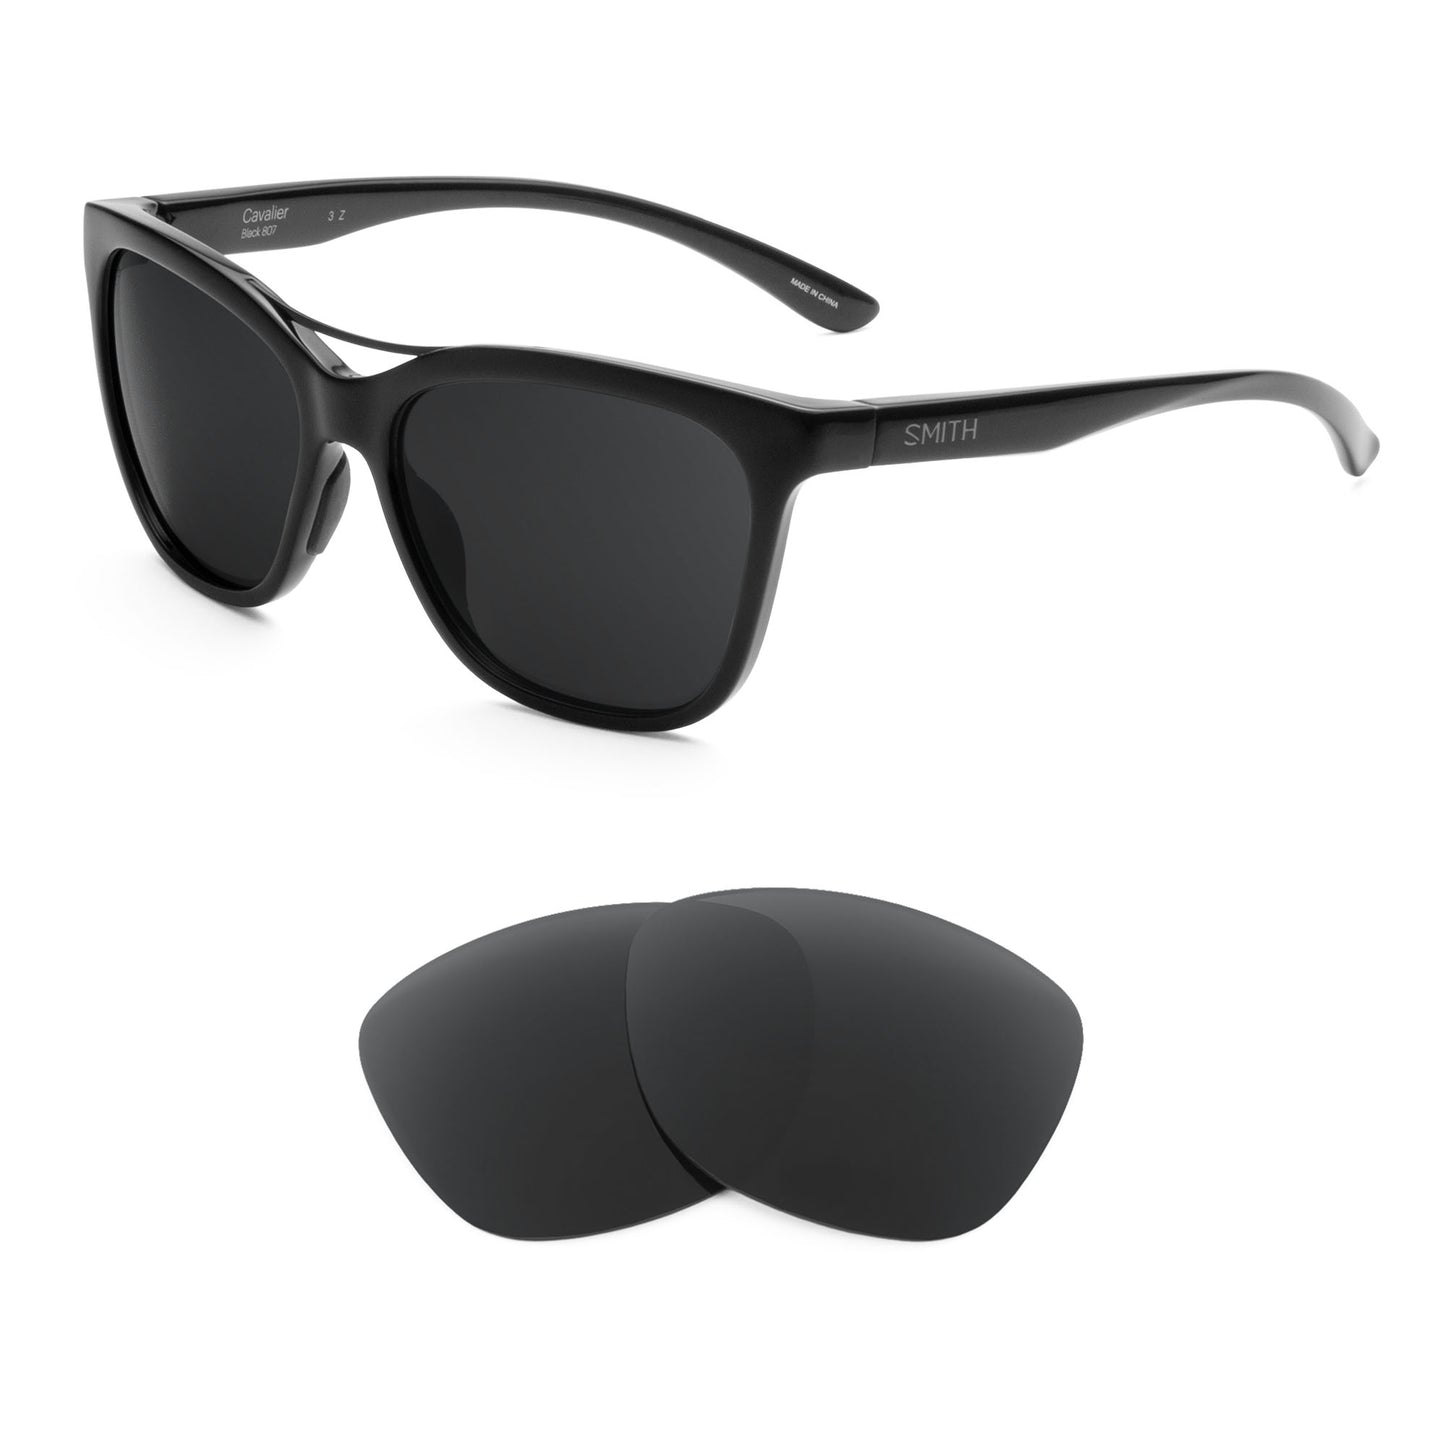 Smith Cavalier sunglasses with replacement lenses